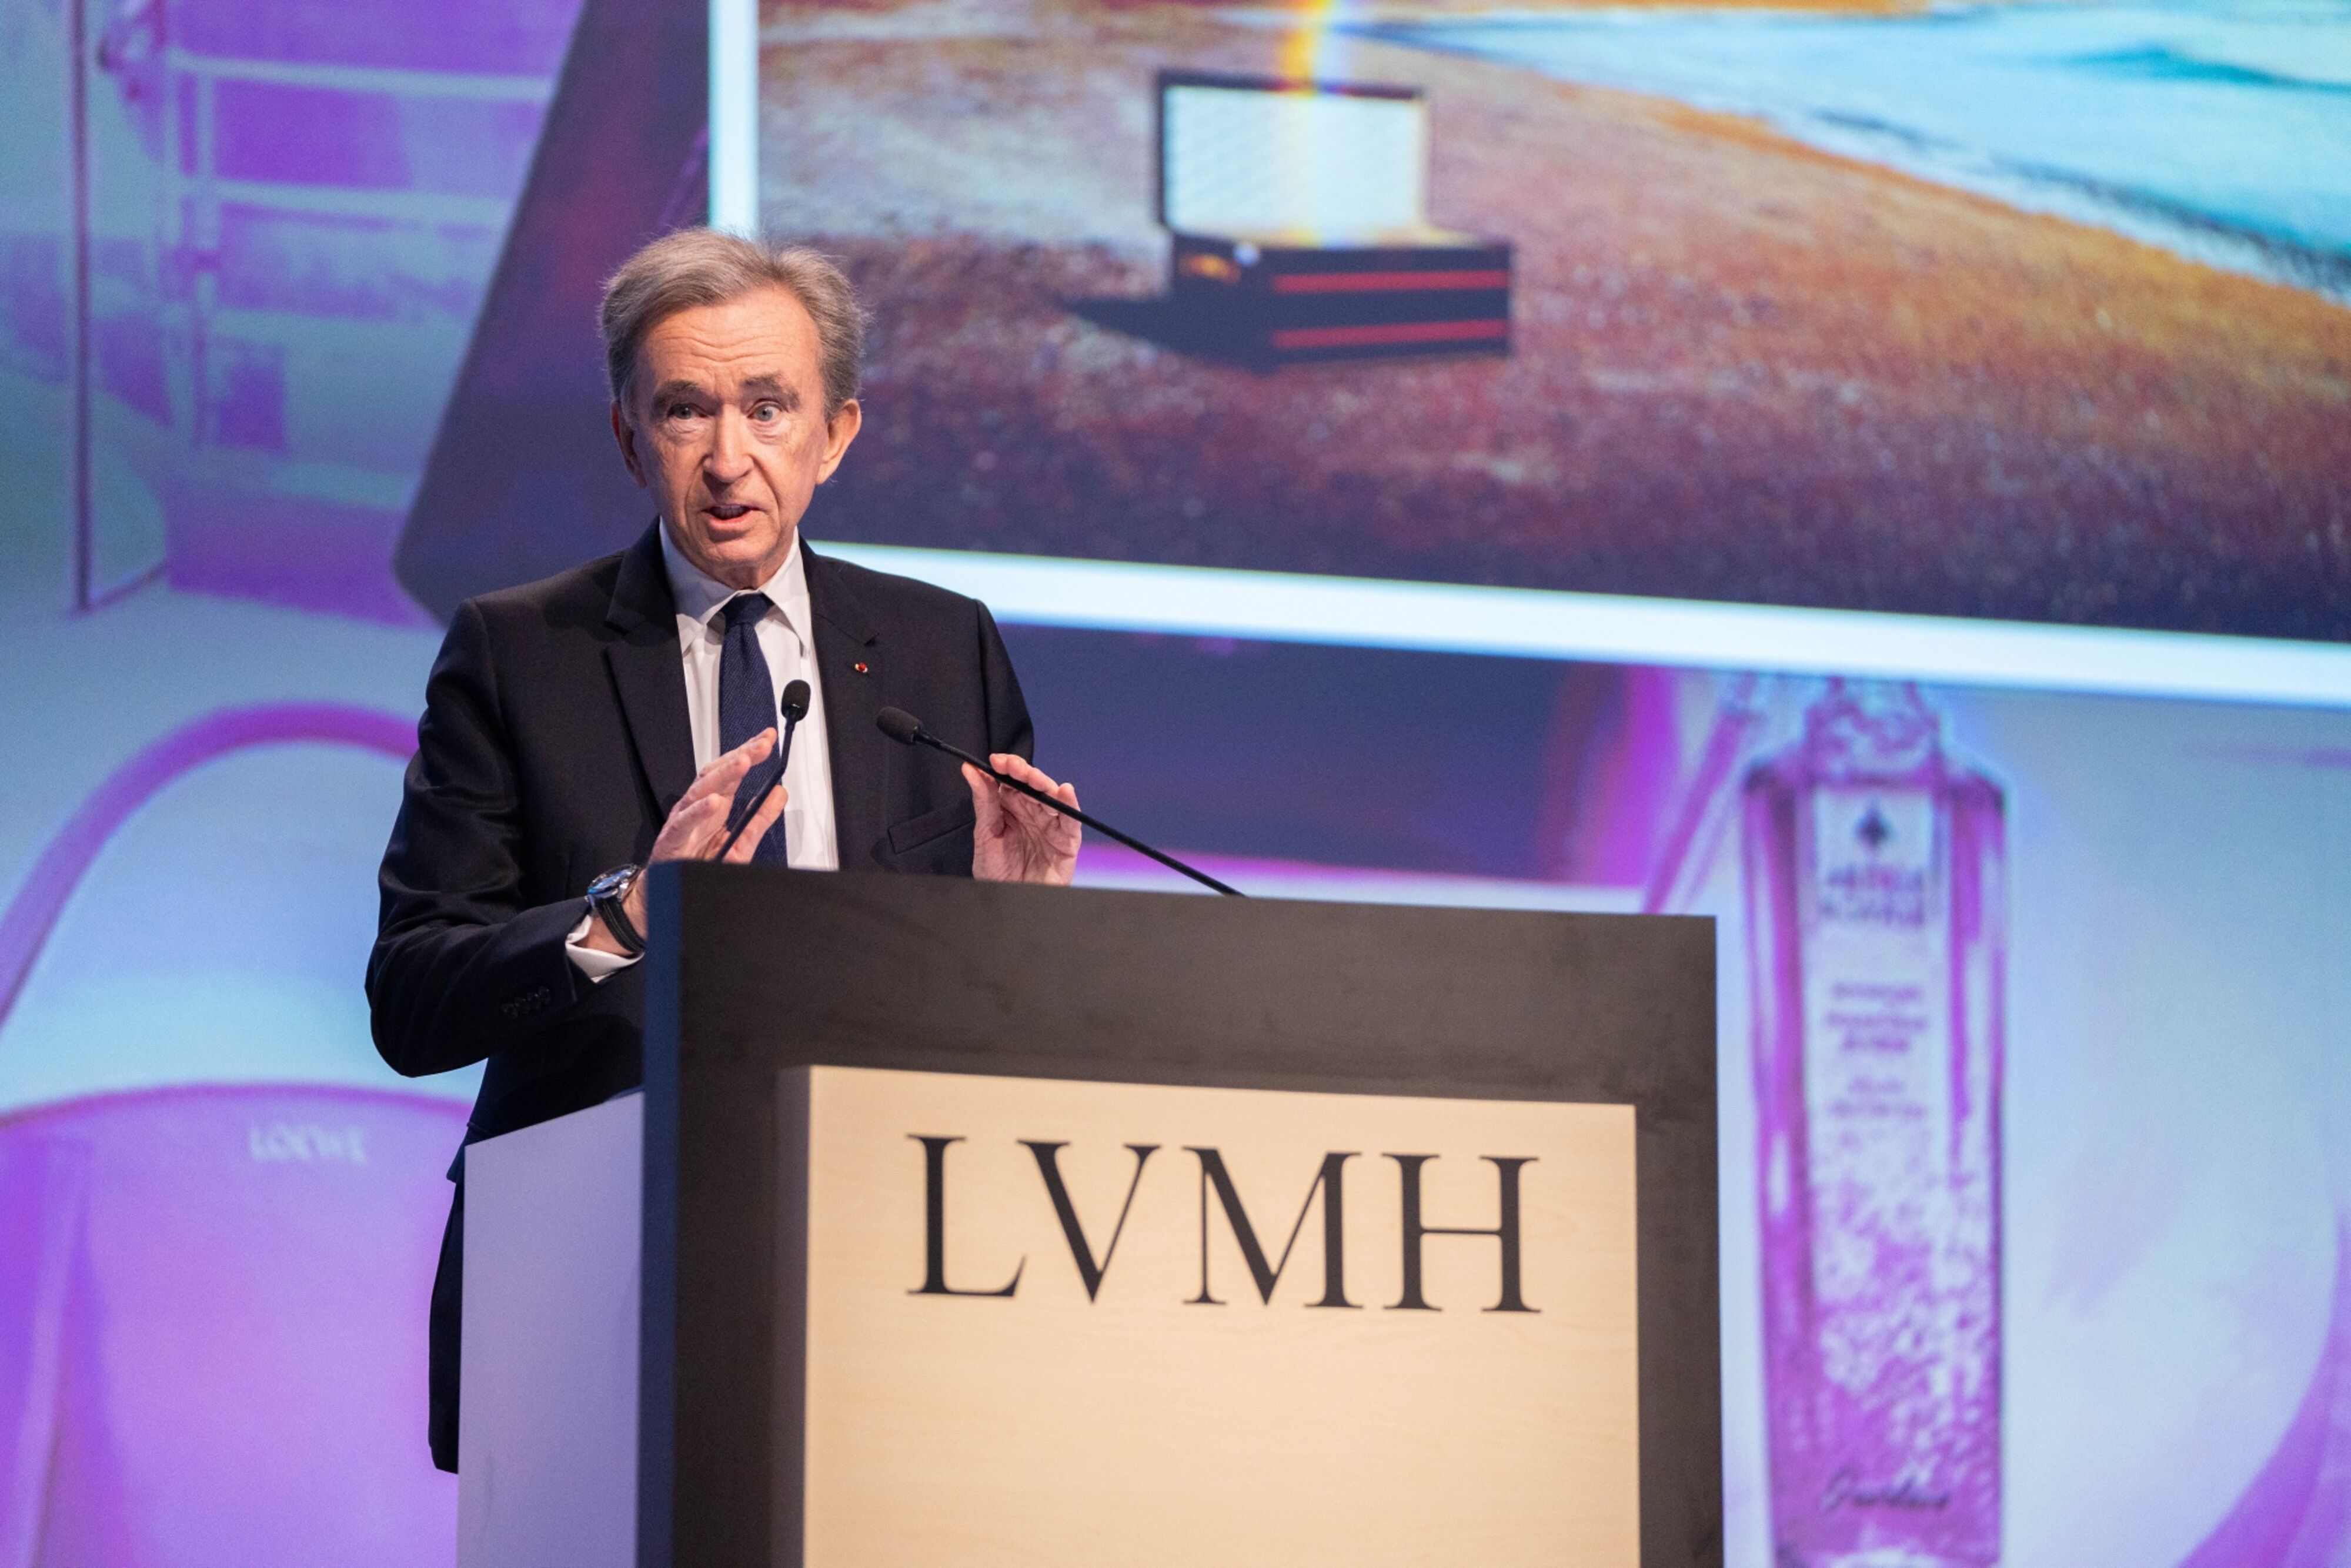 LVMH Becomes the New Luxury Goods Colossus Following the Full